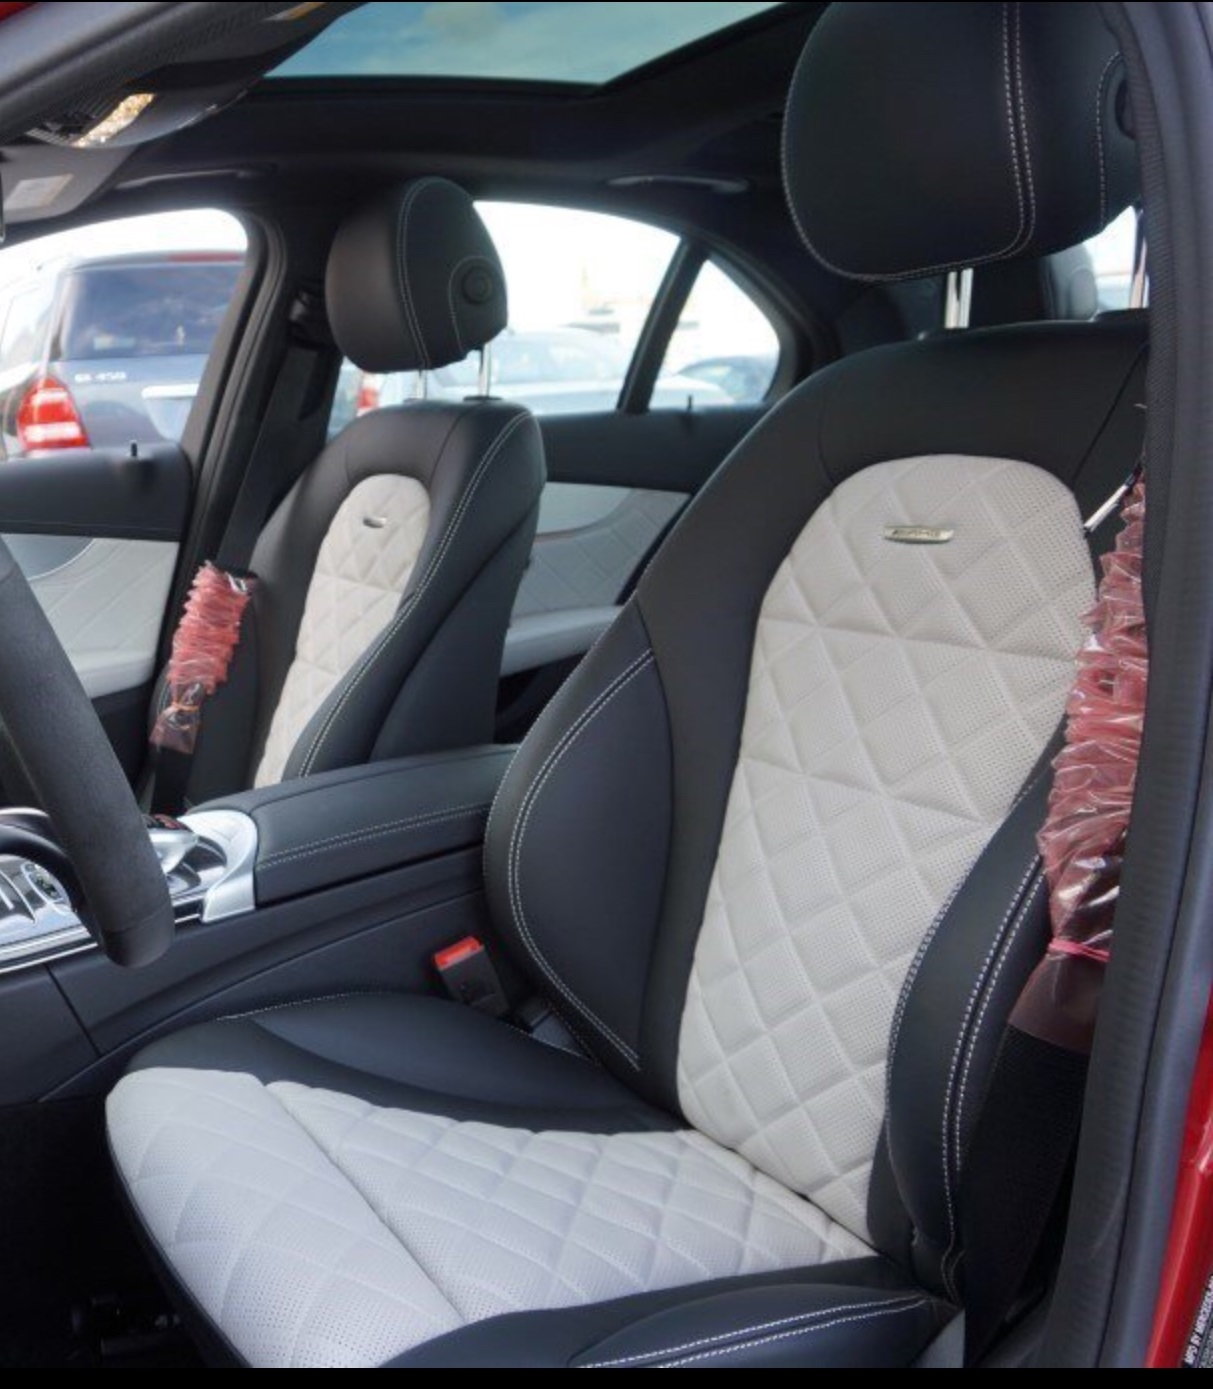 Interior/Upholstery - WTB designo Platinum White Pearl/Black Nappa leather Standard Seats w/Heater - New or Used - 2016 to 2018 Mercedes-Benz C43 AMG - Kirkland, WA 98034, United States